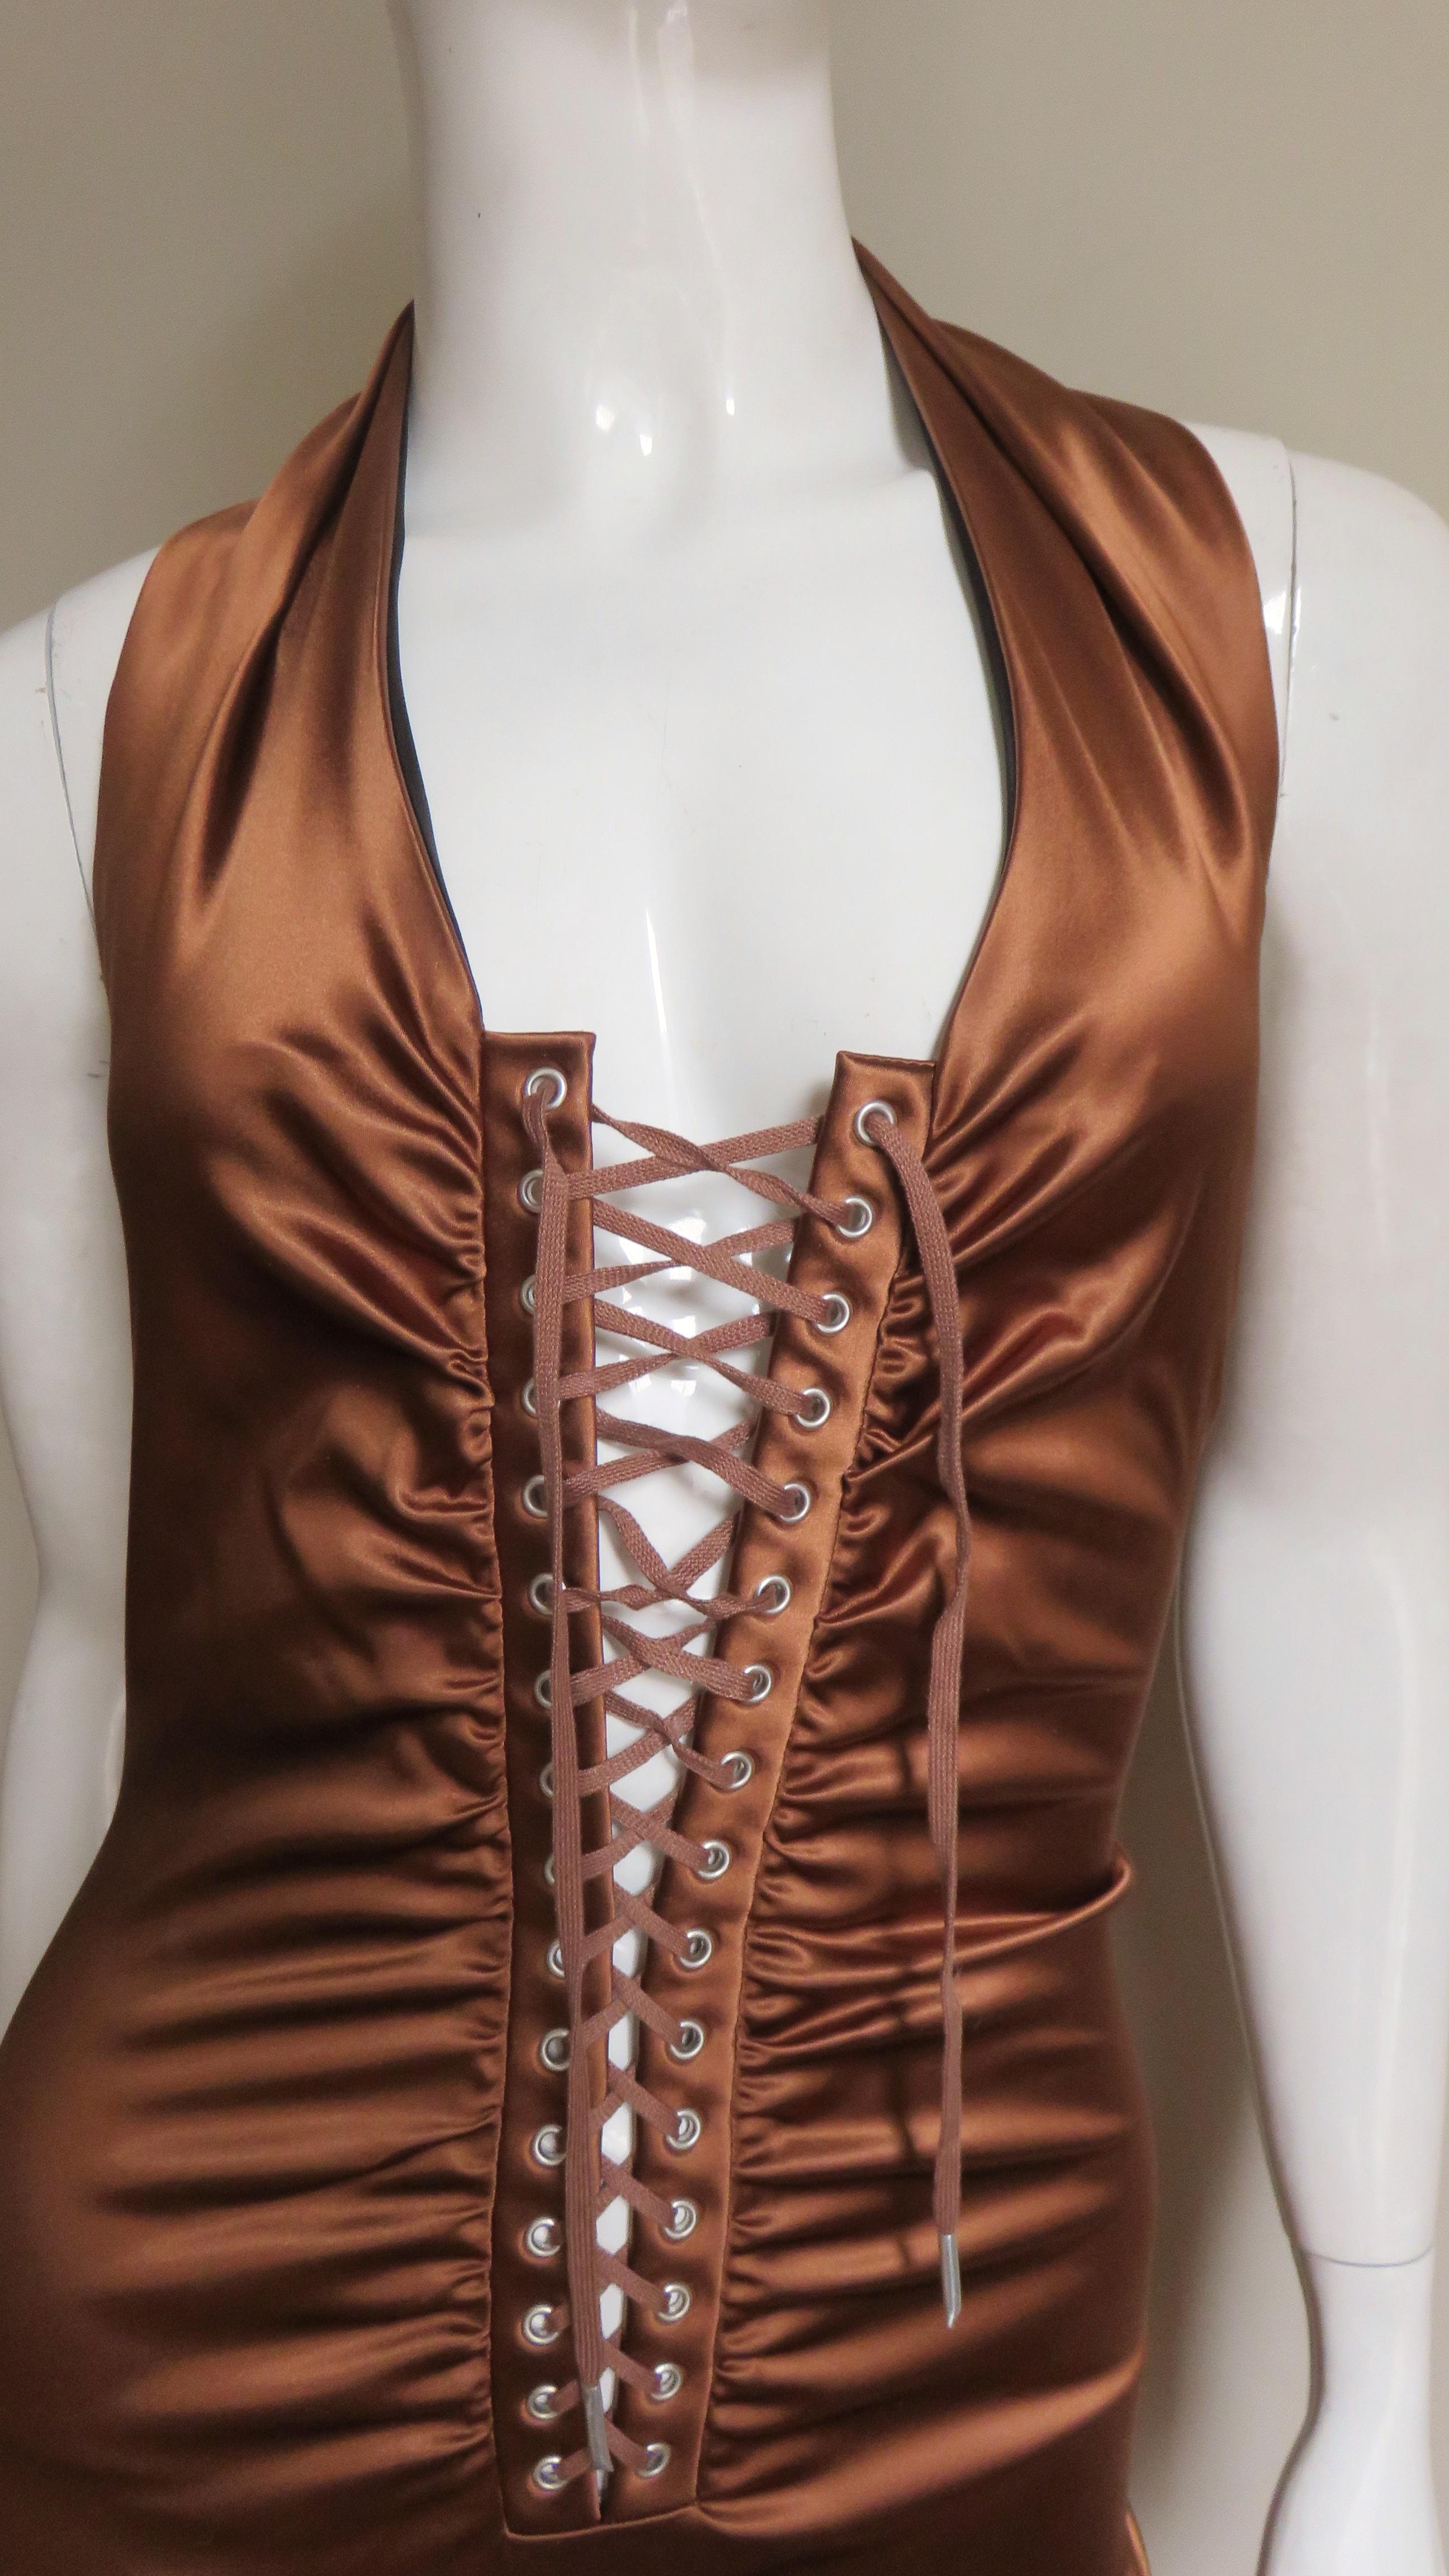 Dolce & Gabbana Silk Lace up Halter Dress In Excellent Condition For Sale In Water Mill, NY